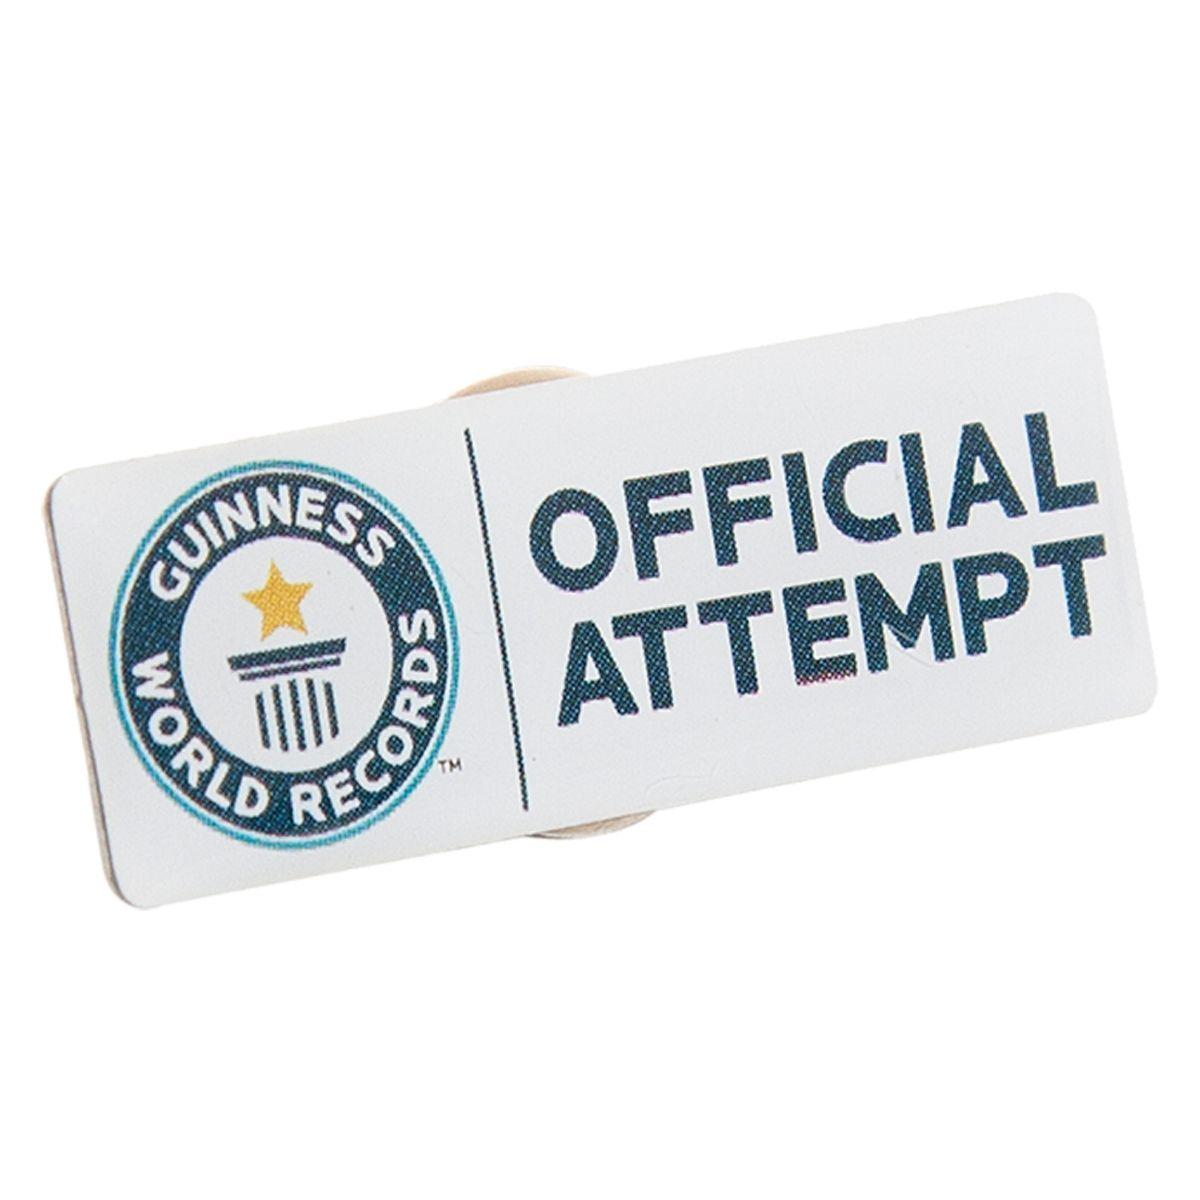 Guinness World Records Logo - The Guinness World Records Store - Pin Badges